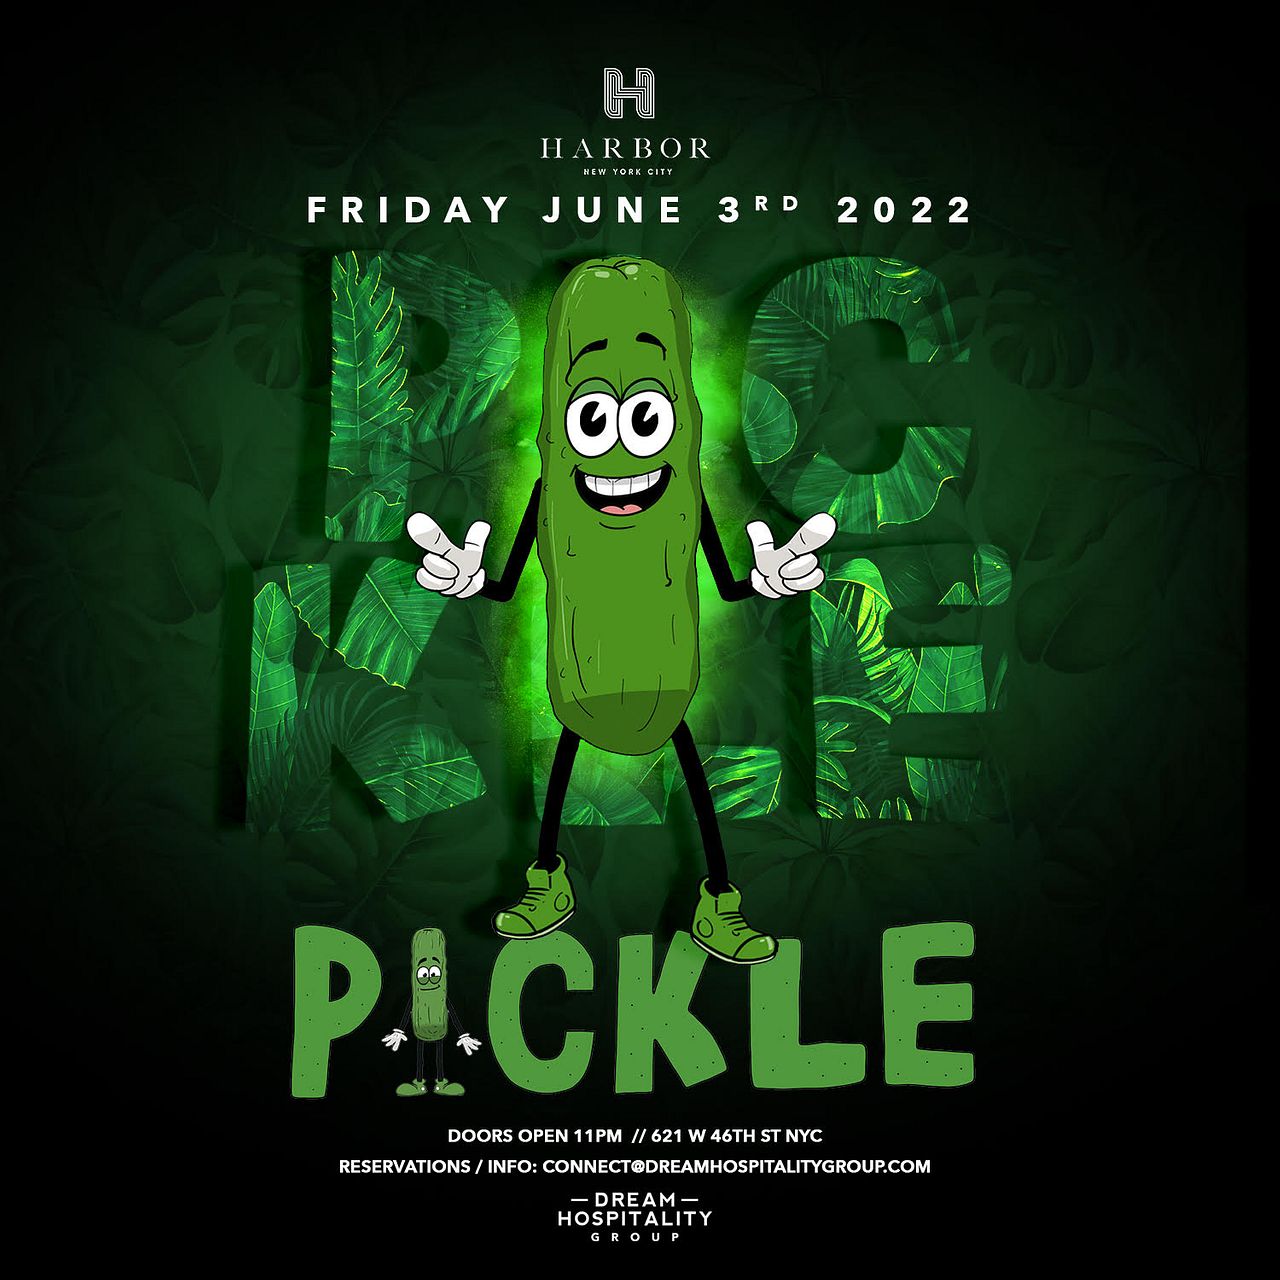 PICKLE HARBOR NYC Tickets at Harbor New York City in New York by